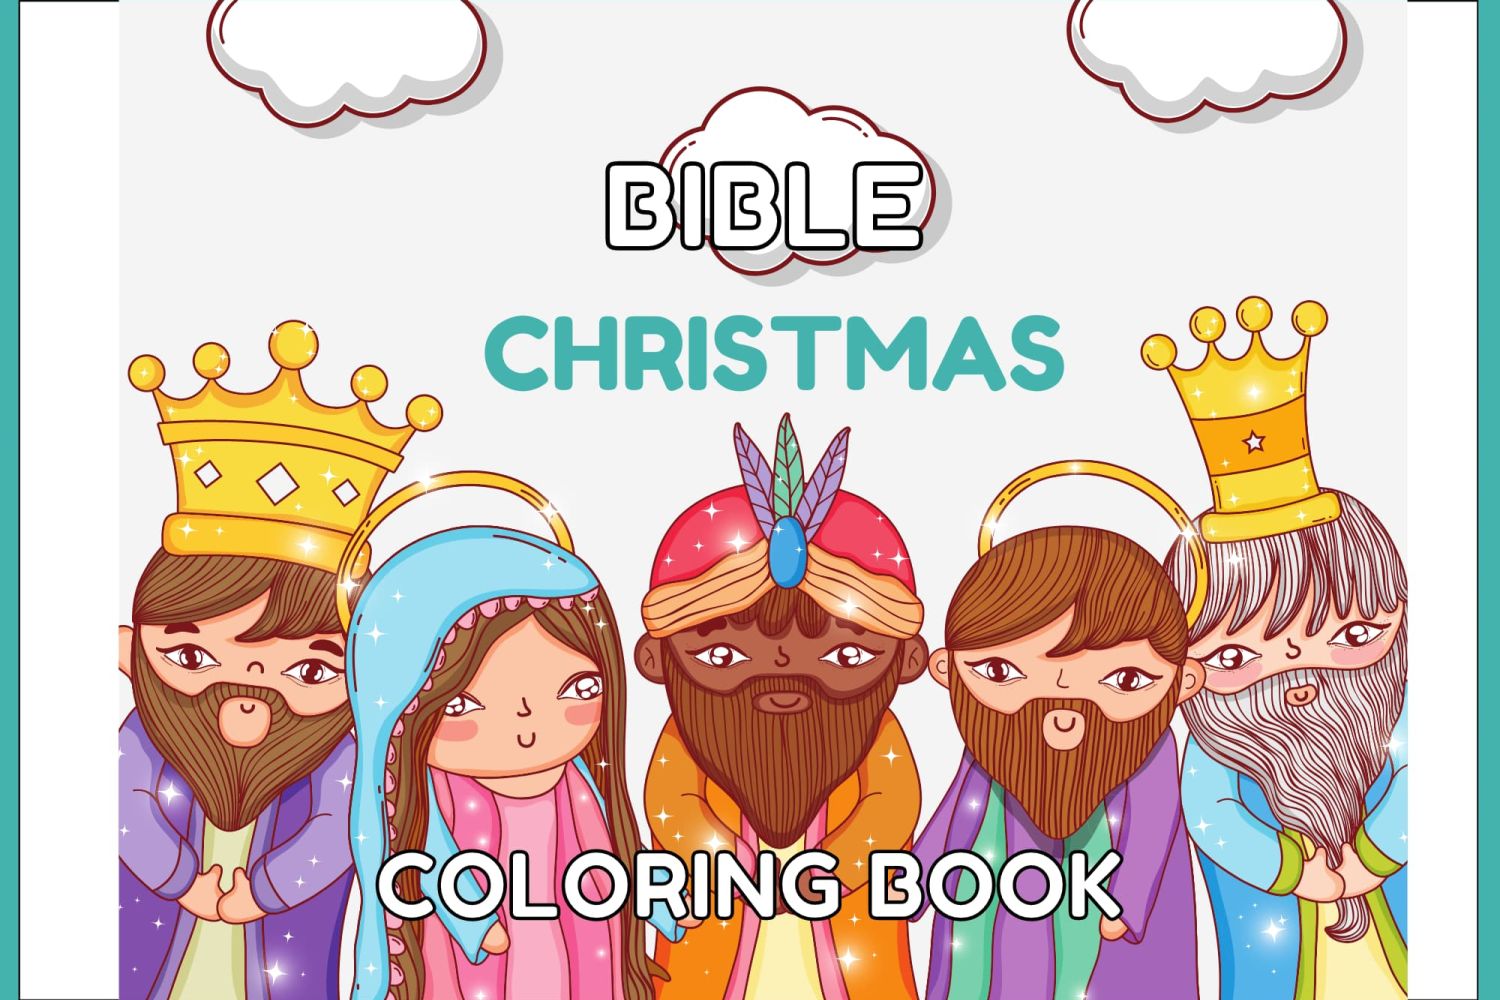 Craft%20-%20Christmas%20-%20Christmas%20story%20colouring%20book-45005b5a Crafts